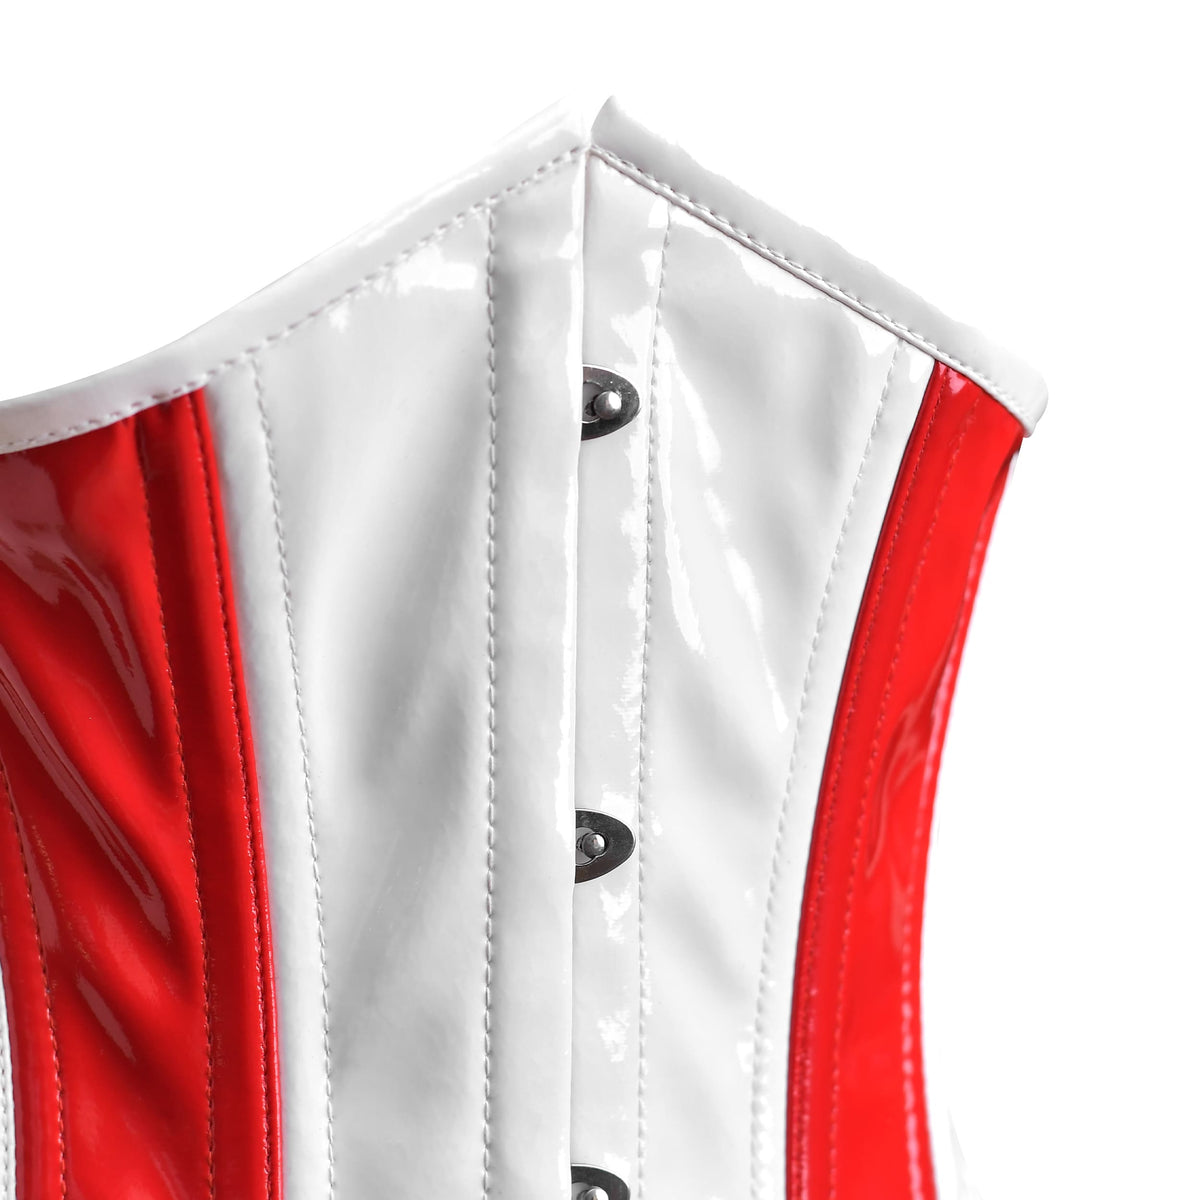 Red and white corset